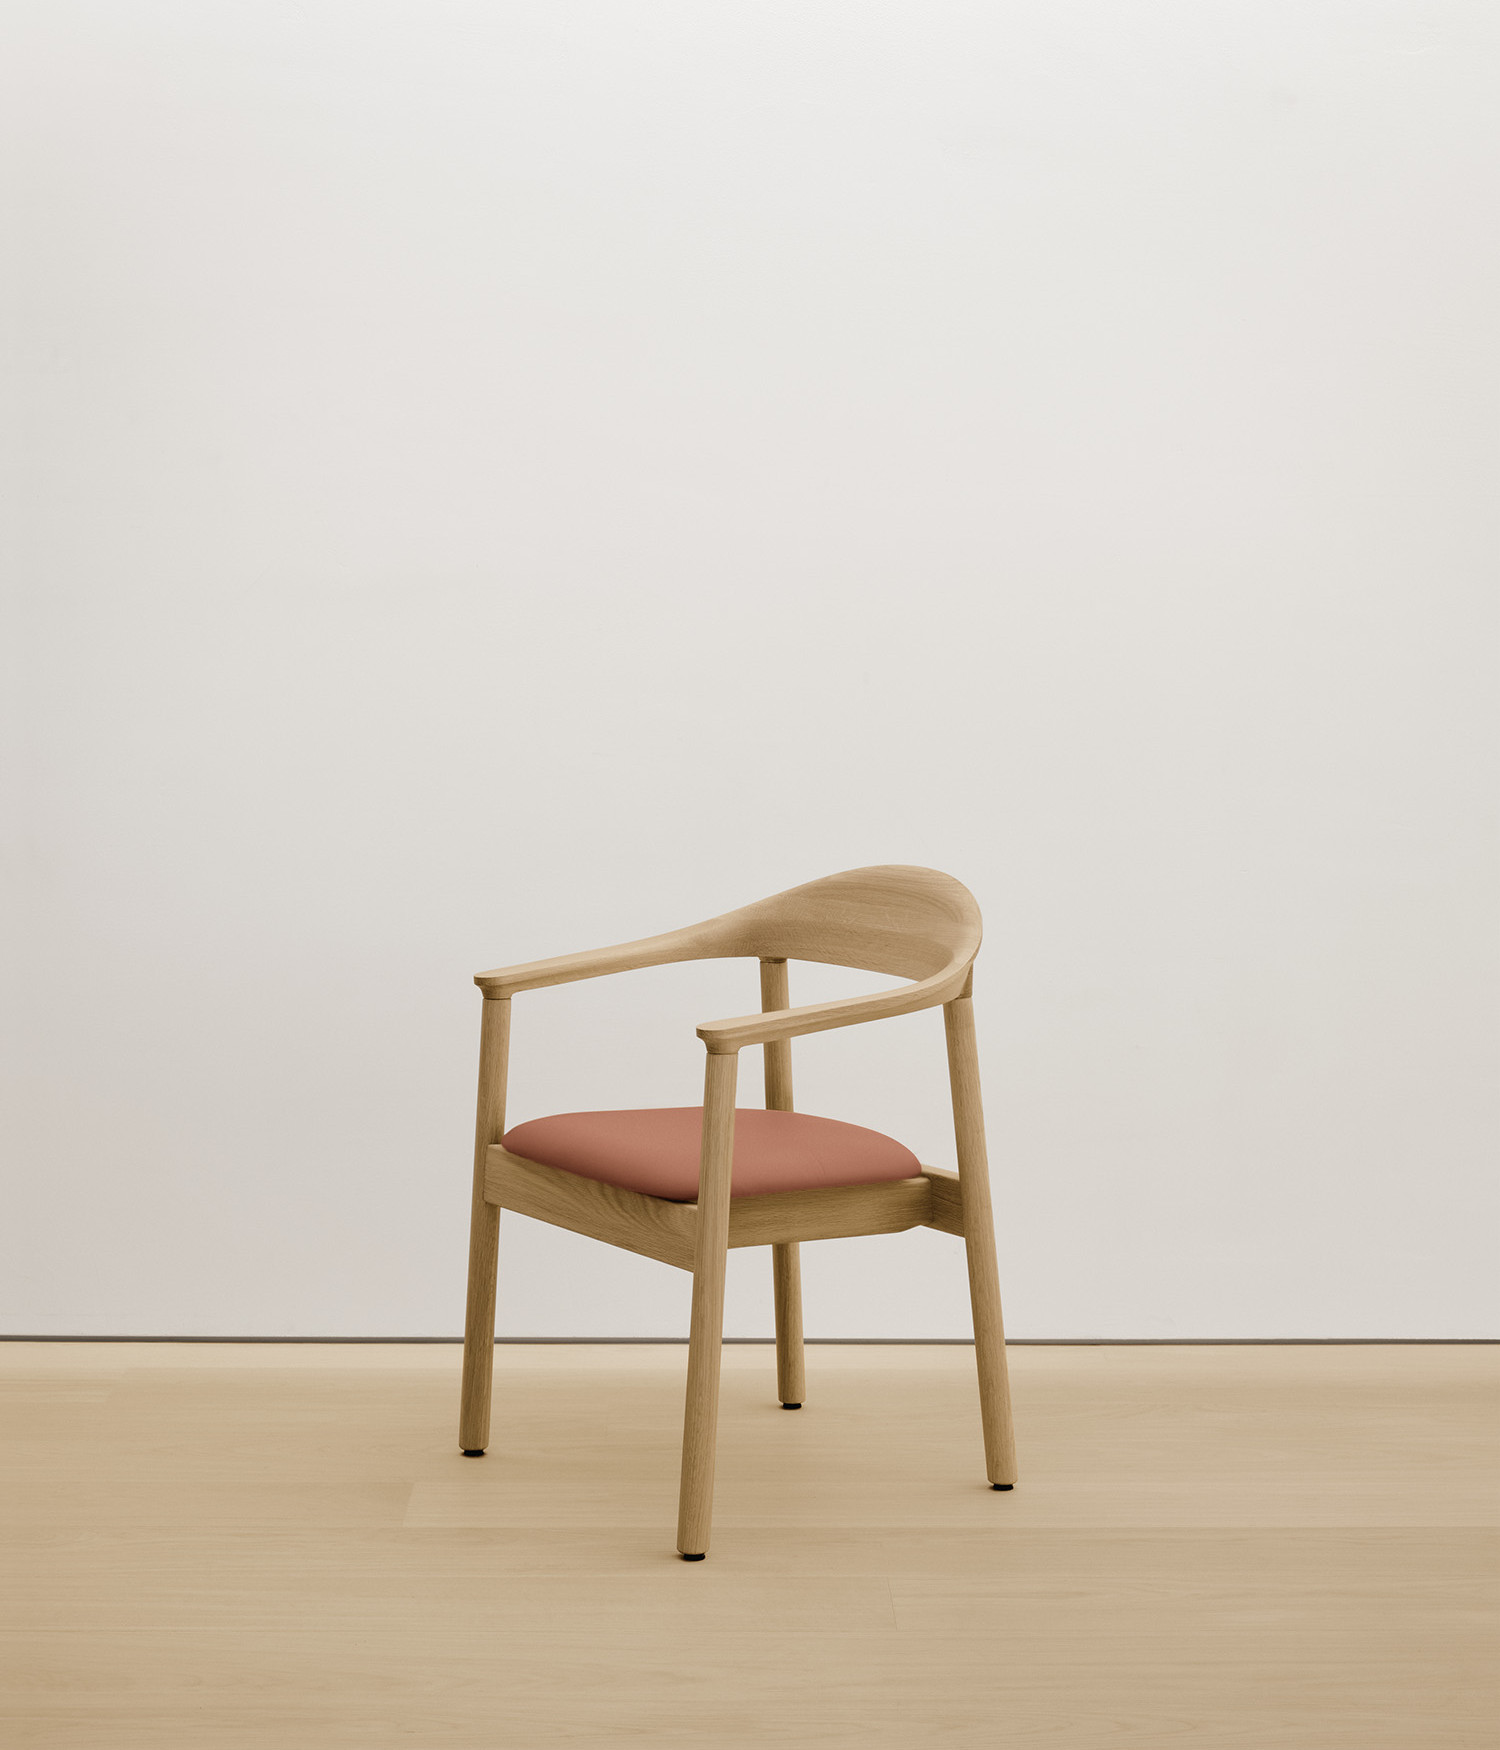  white-oak chair with clay color upholstered seat  